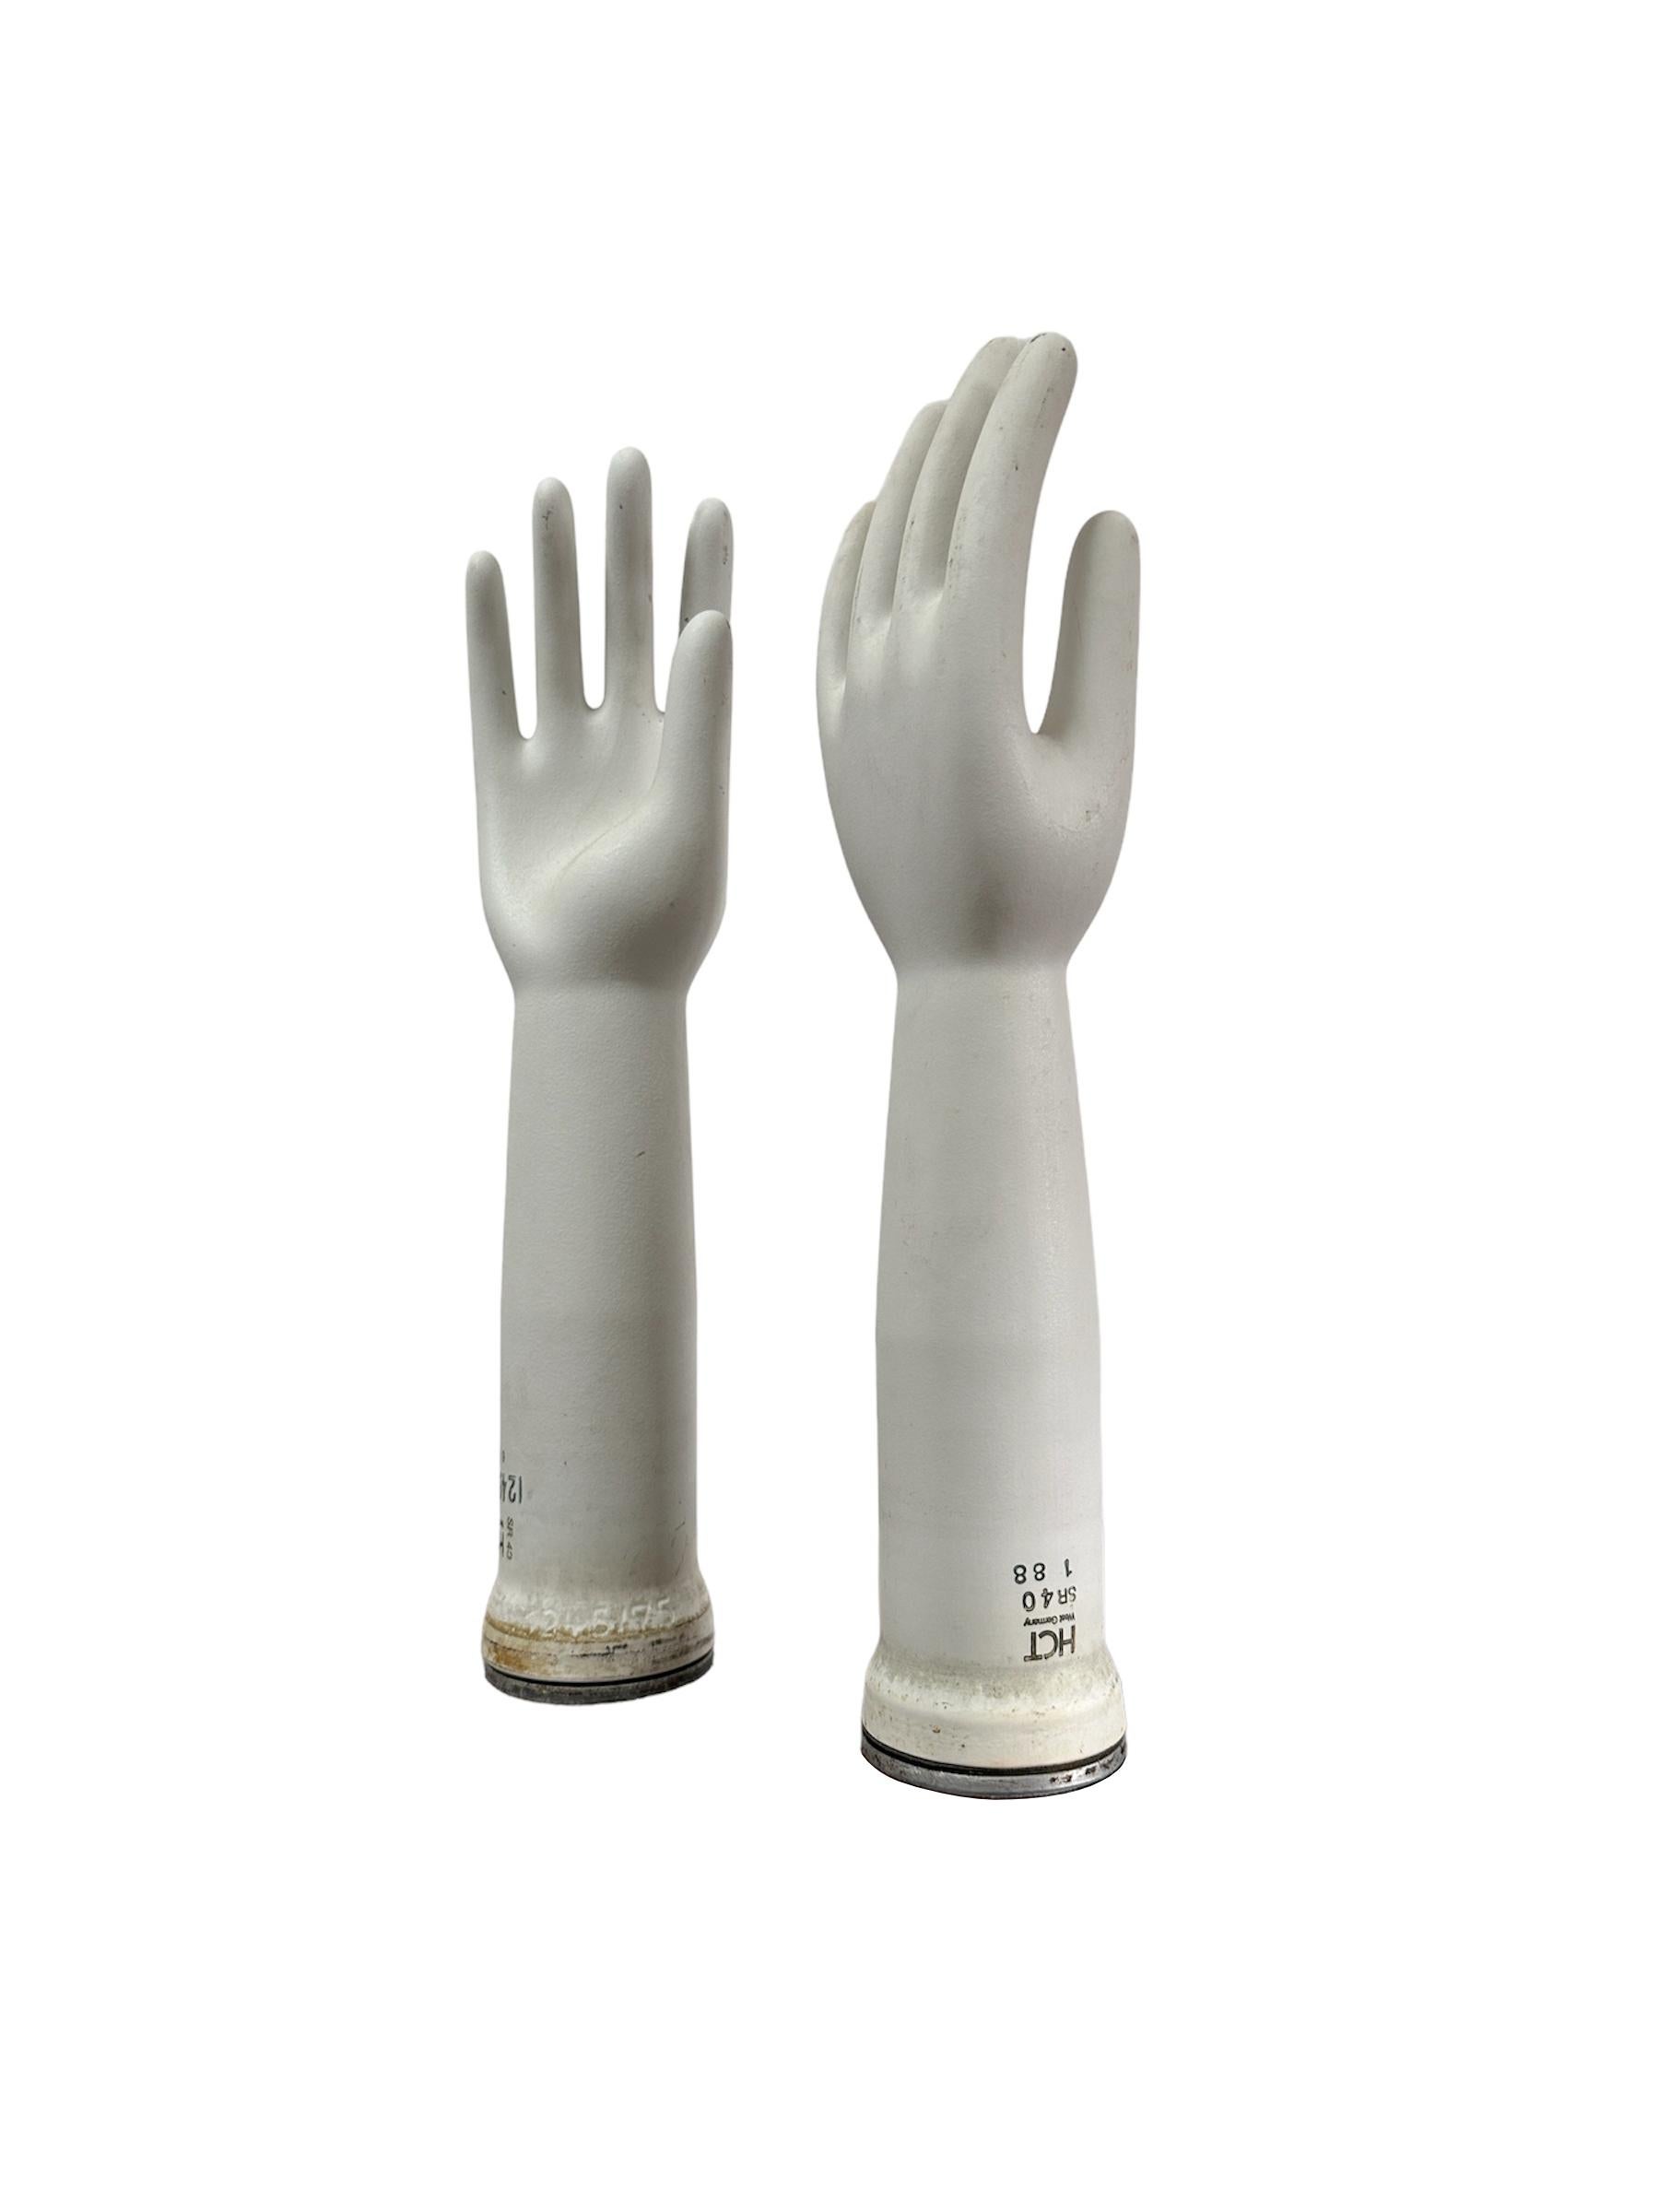 - A beautiful pair of original ceramic glove moulds with makers mark, Germany circa 1940.
- Both of the matching moulds are constructed from a quality porcelain, stamped at the bottom with their makers marks, steel discs to the underneath and where